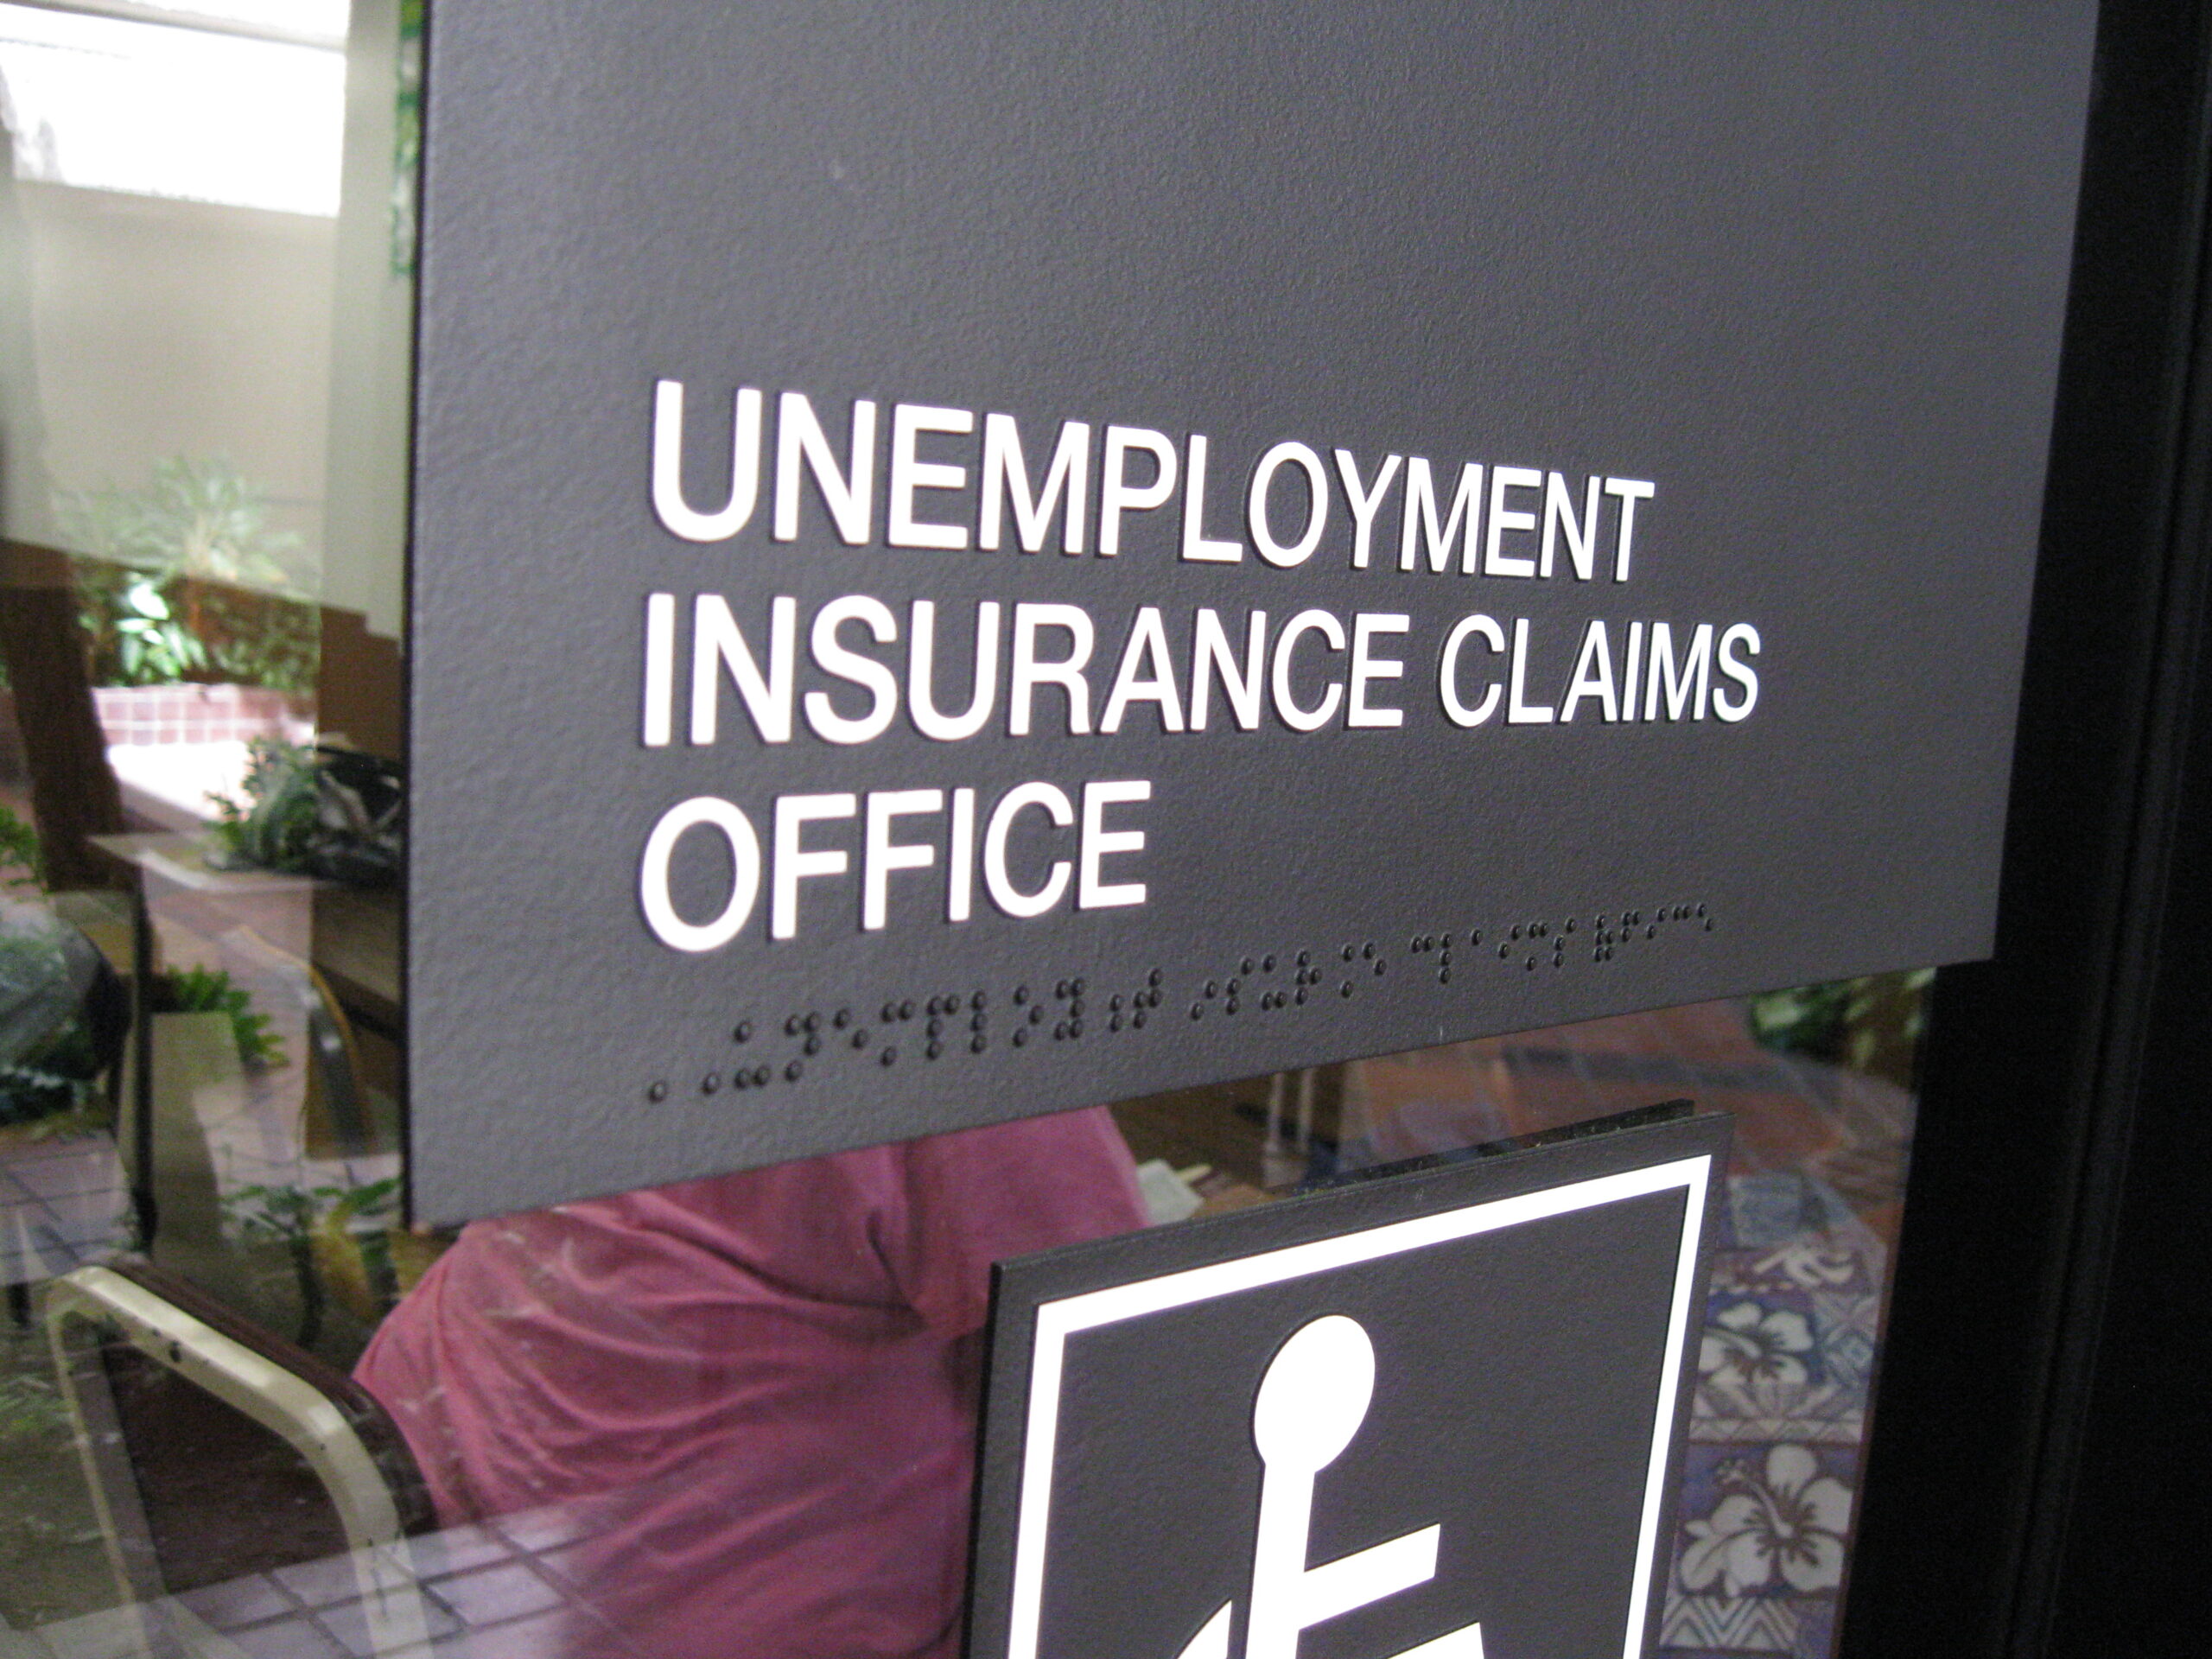 Unemployment insurance claims office